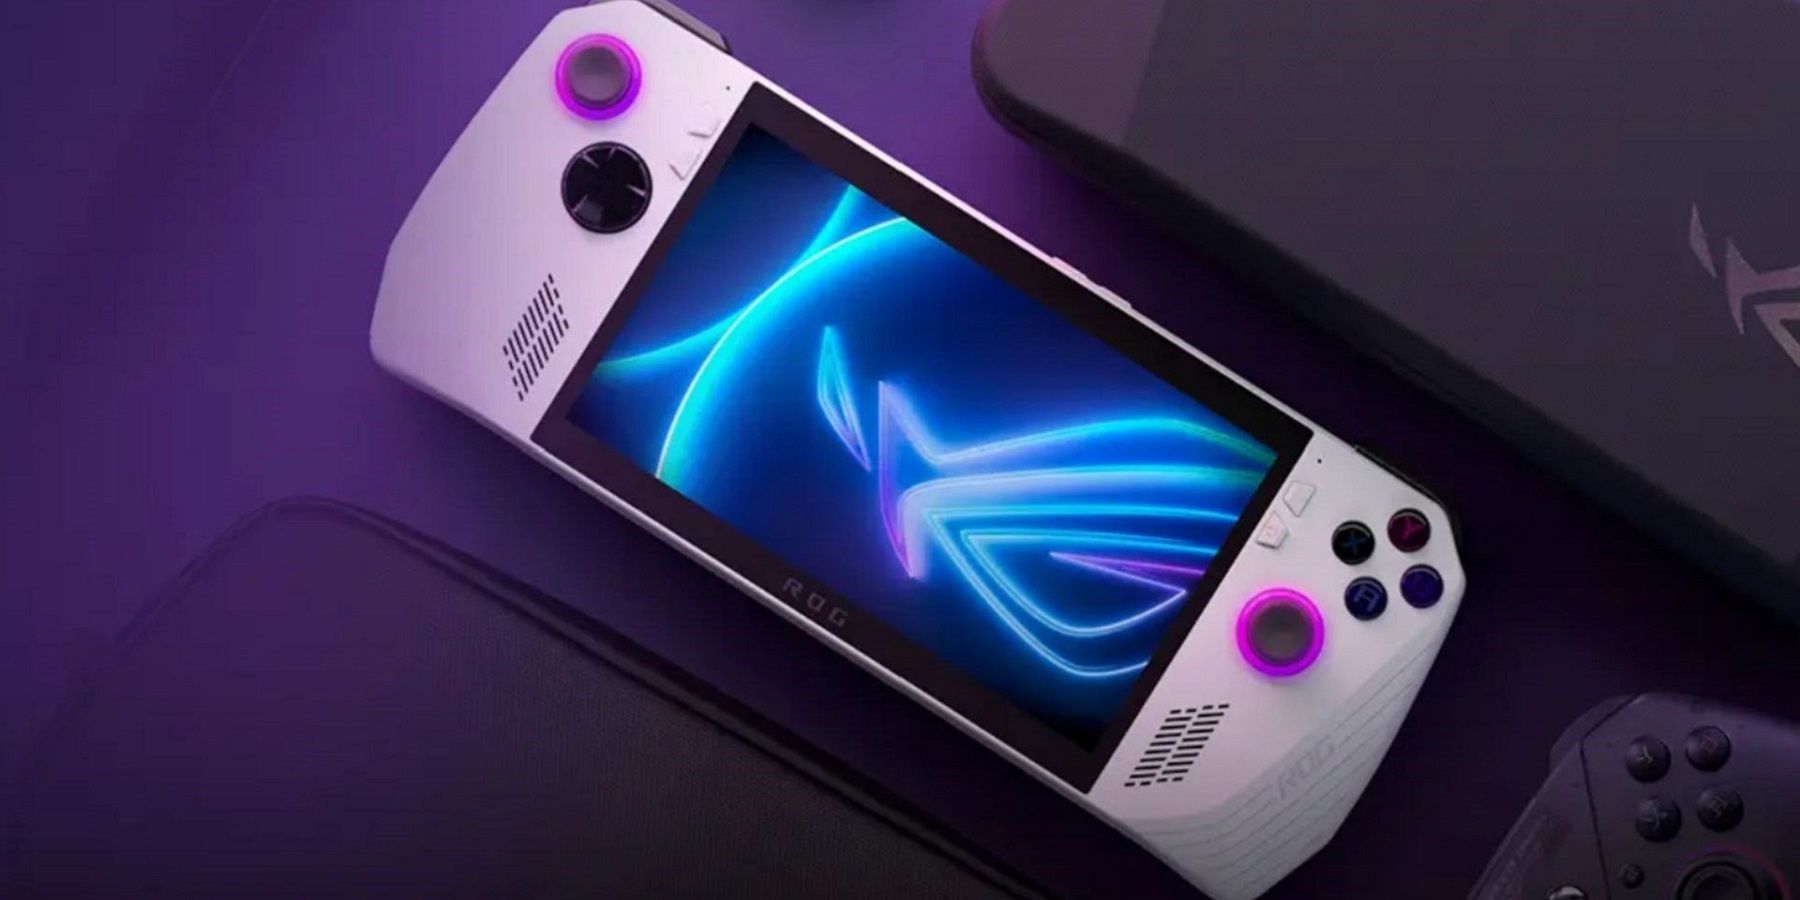 The Asus ROG Ally device on a purple background.